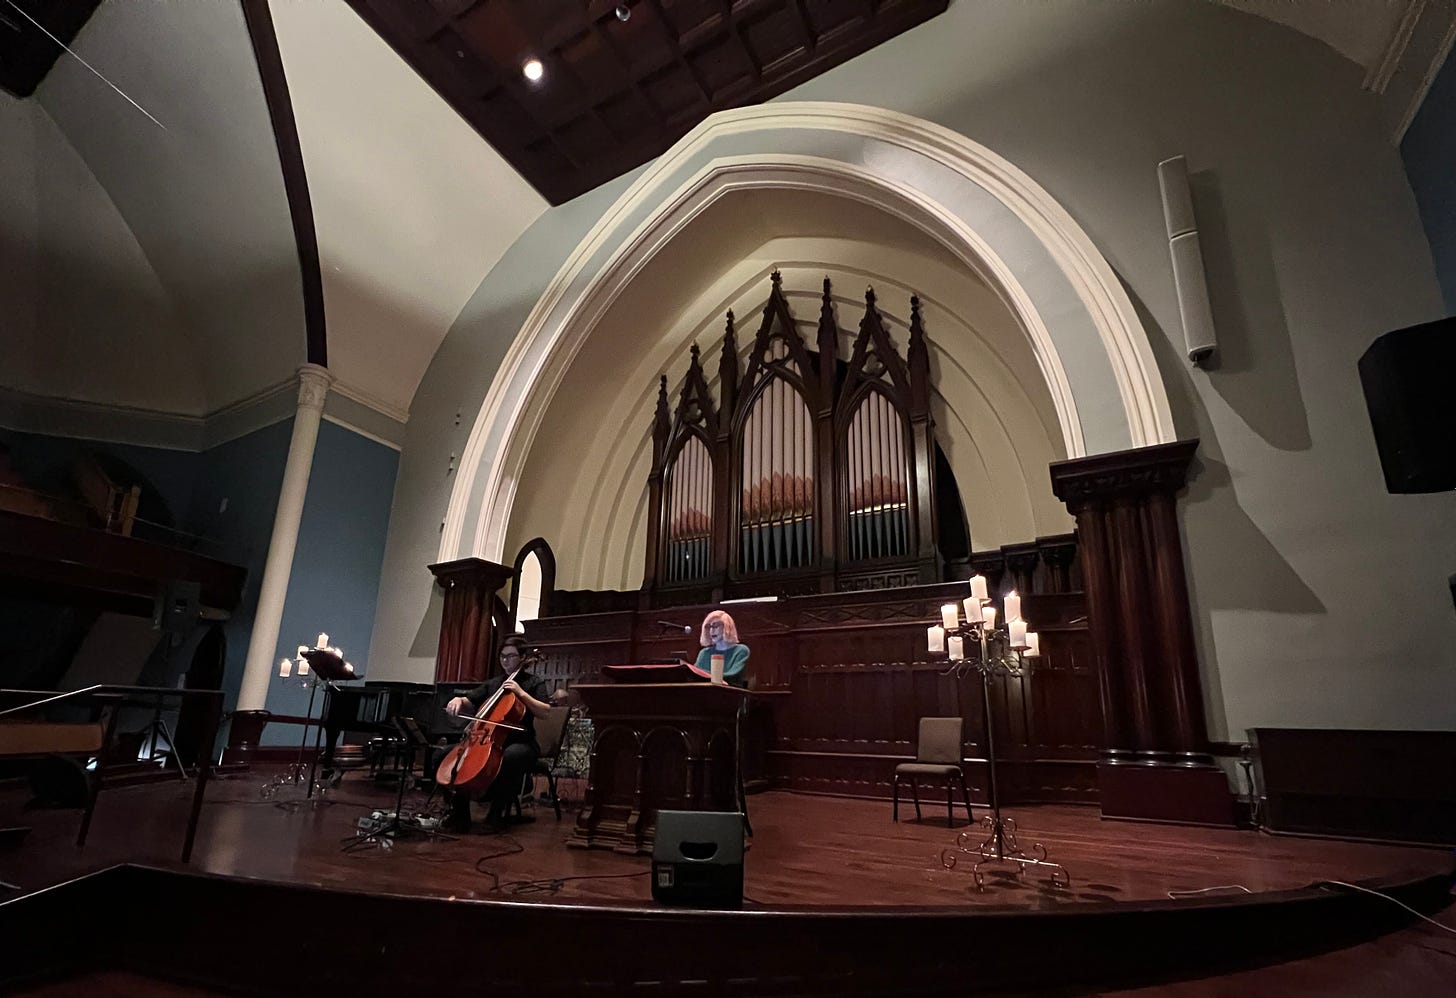 Elle sitting behind pulpit and Julian holding their cello on the "stage" in Sanctuary Hall with the gran organ behind them and candelabras flanking them